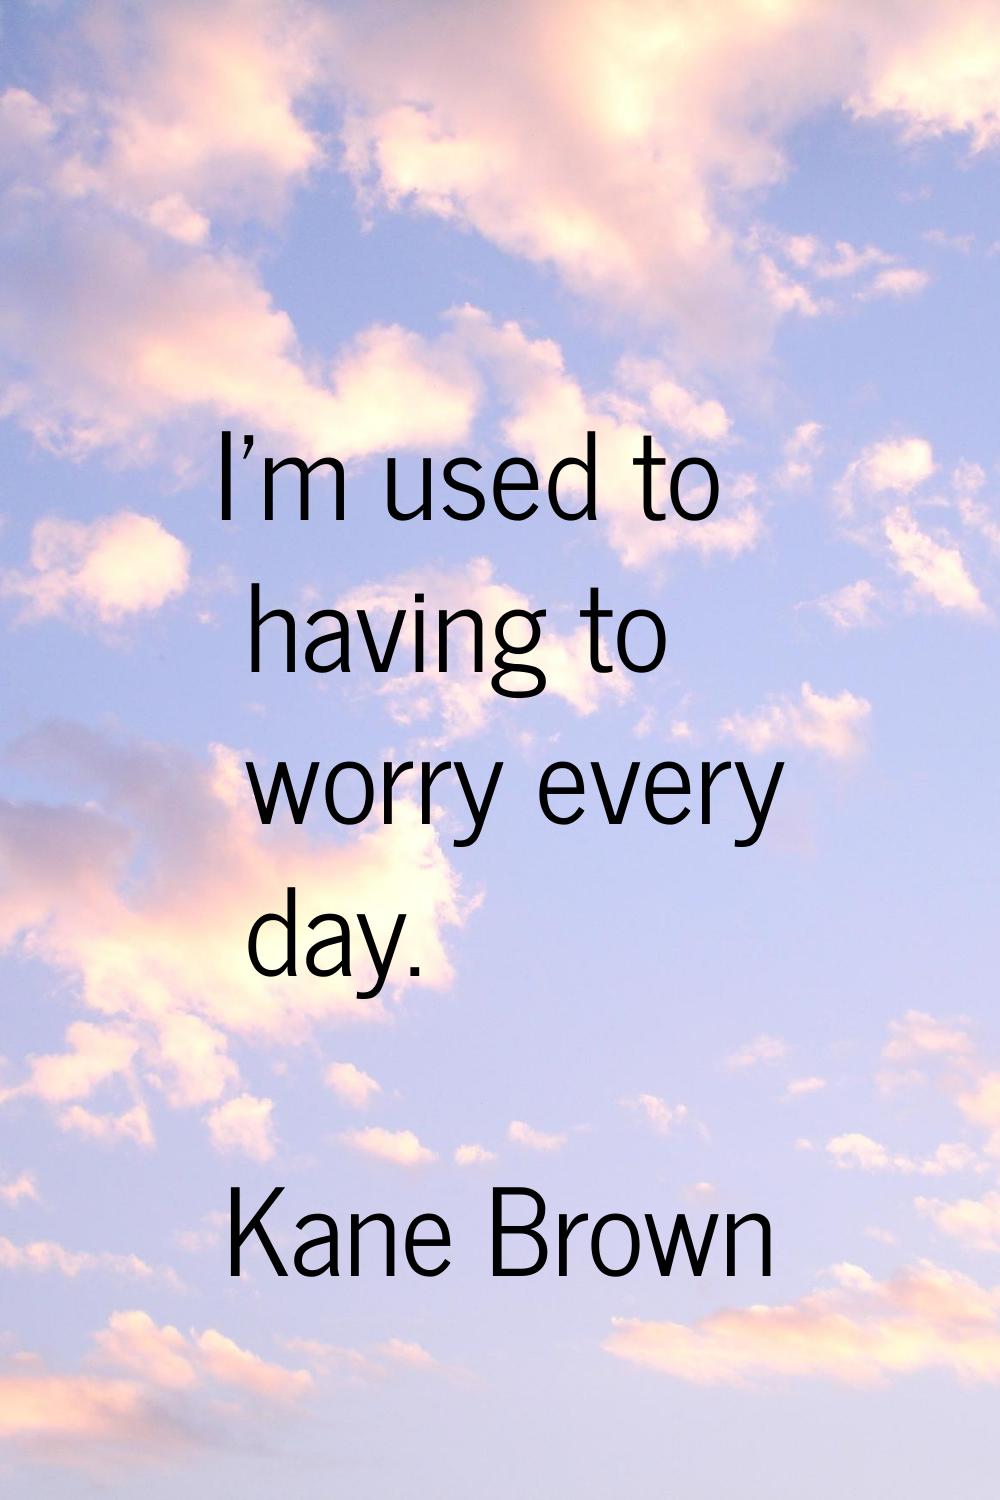 I'm used to having to worry every day.